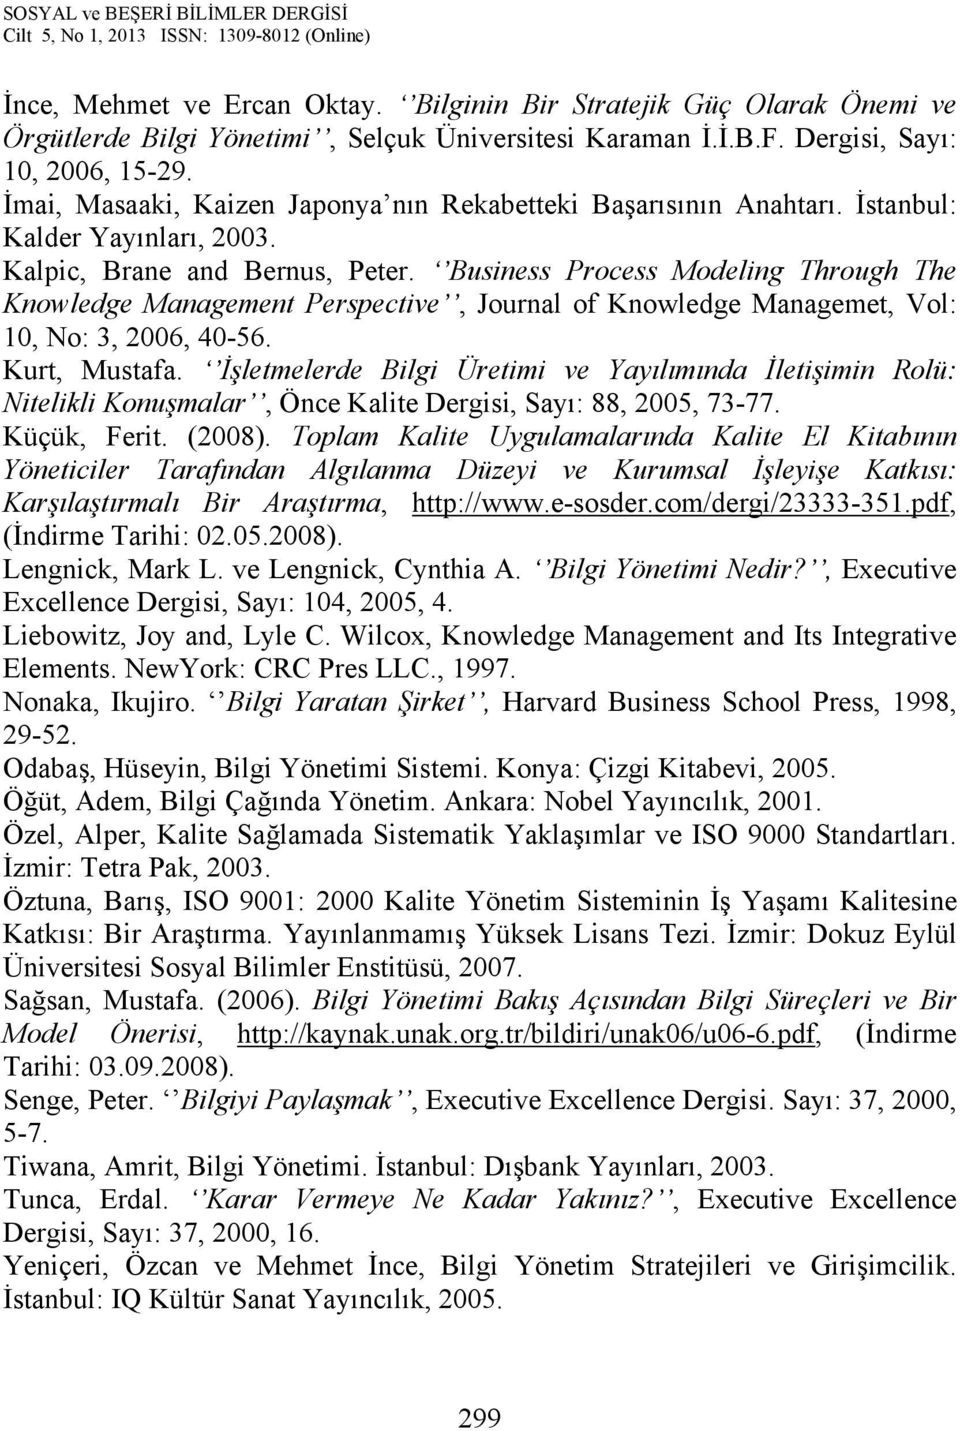 Business Process Modeling Through The Knowledge Management Perspective, Journal of Knowledge Managemet, Vol: 10, No: 3, 2006, 40-56. Kurt, Mustafa.